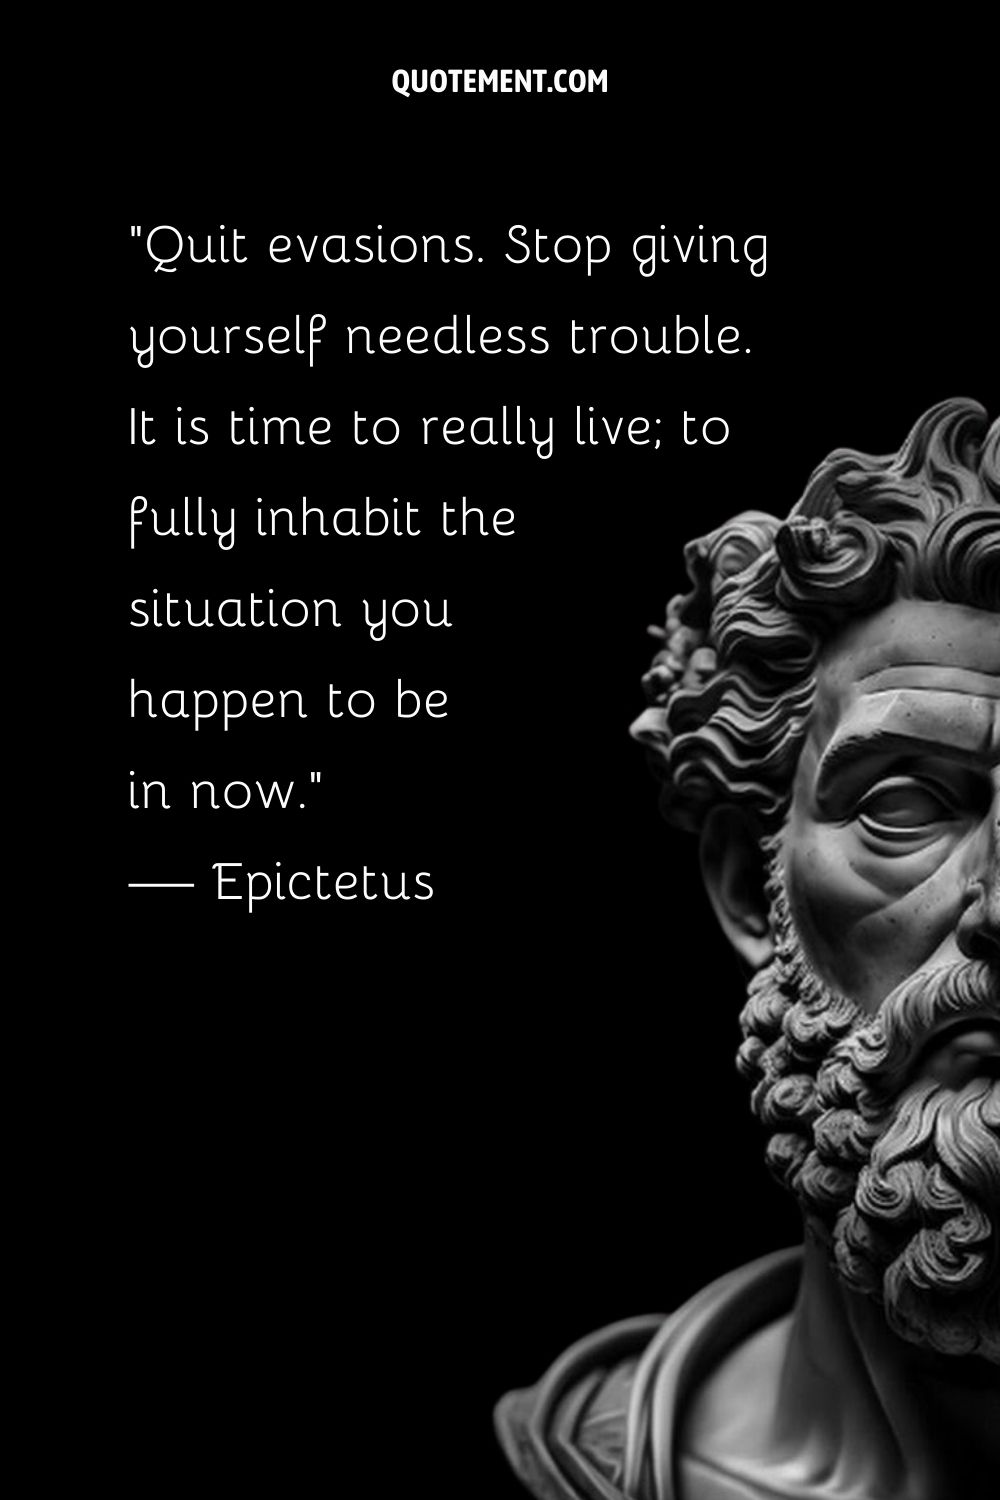 Epictetus' wisdom unfolds silently through sculpted marble tales.